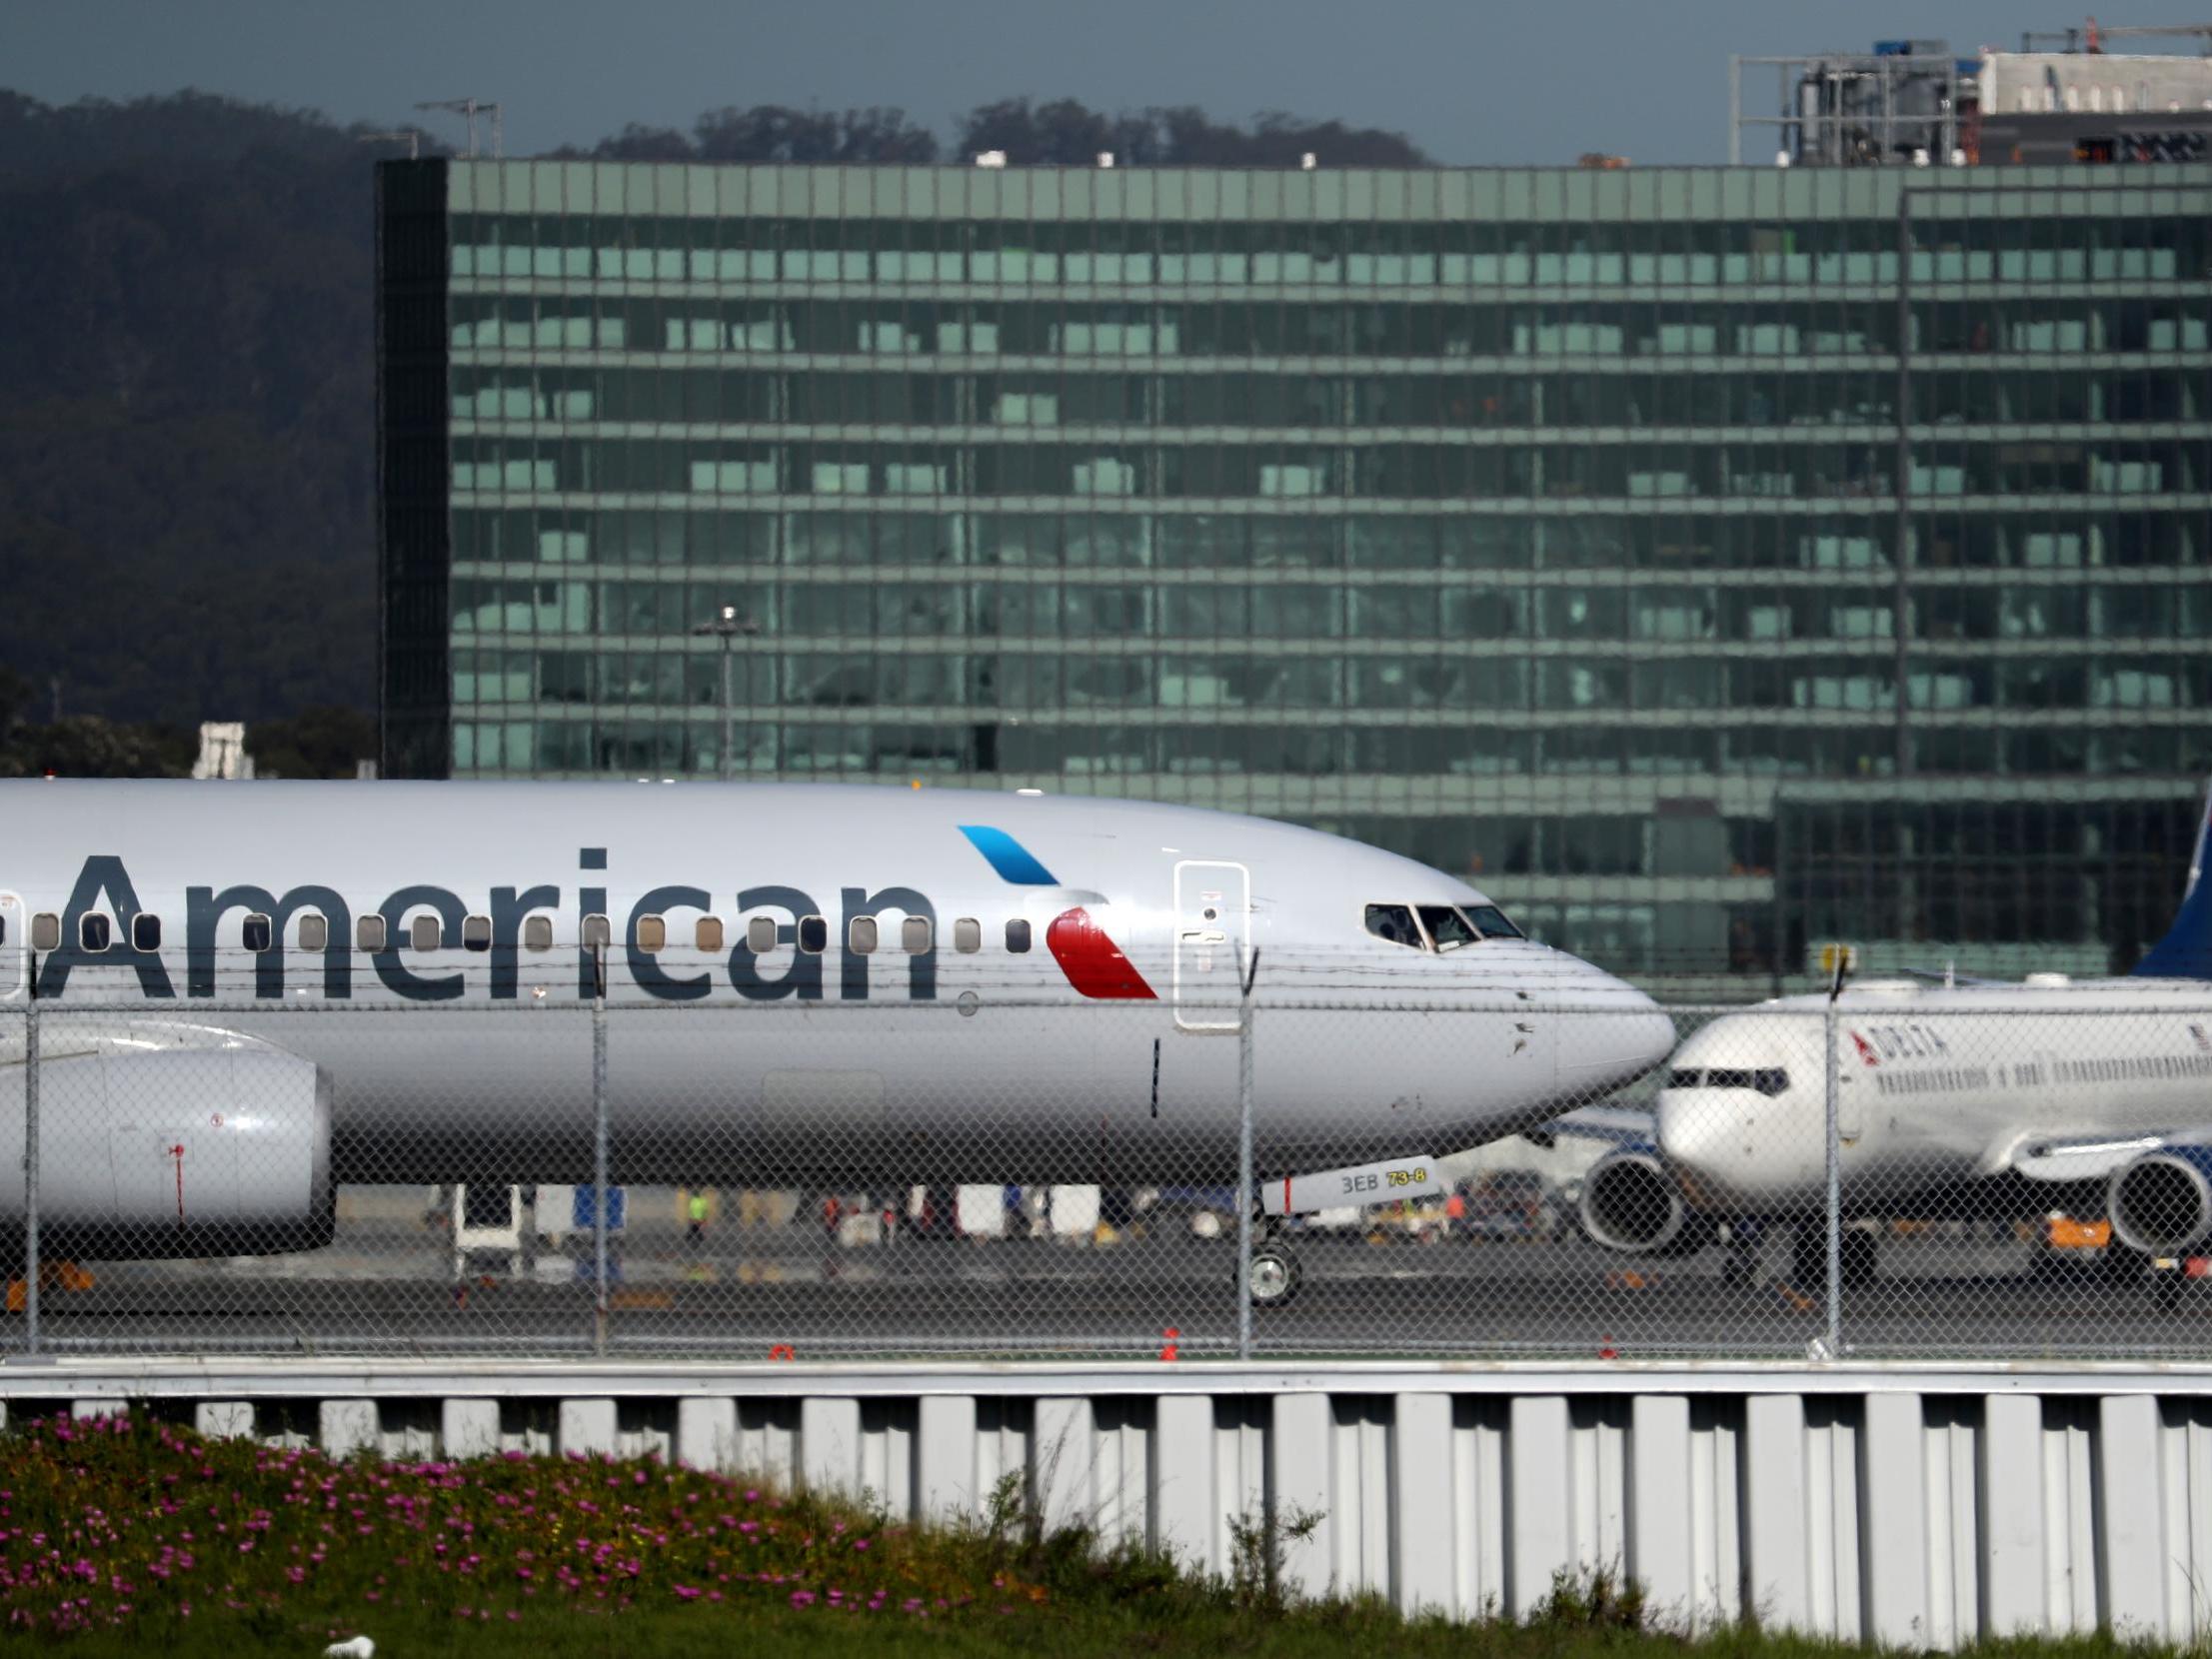 One parent said the way American Airlines dealt with delays was "disgraceful" and says it put her children at risk